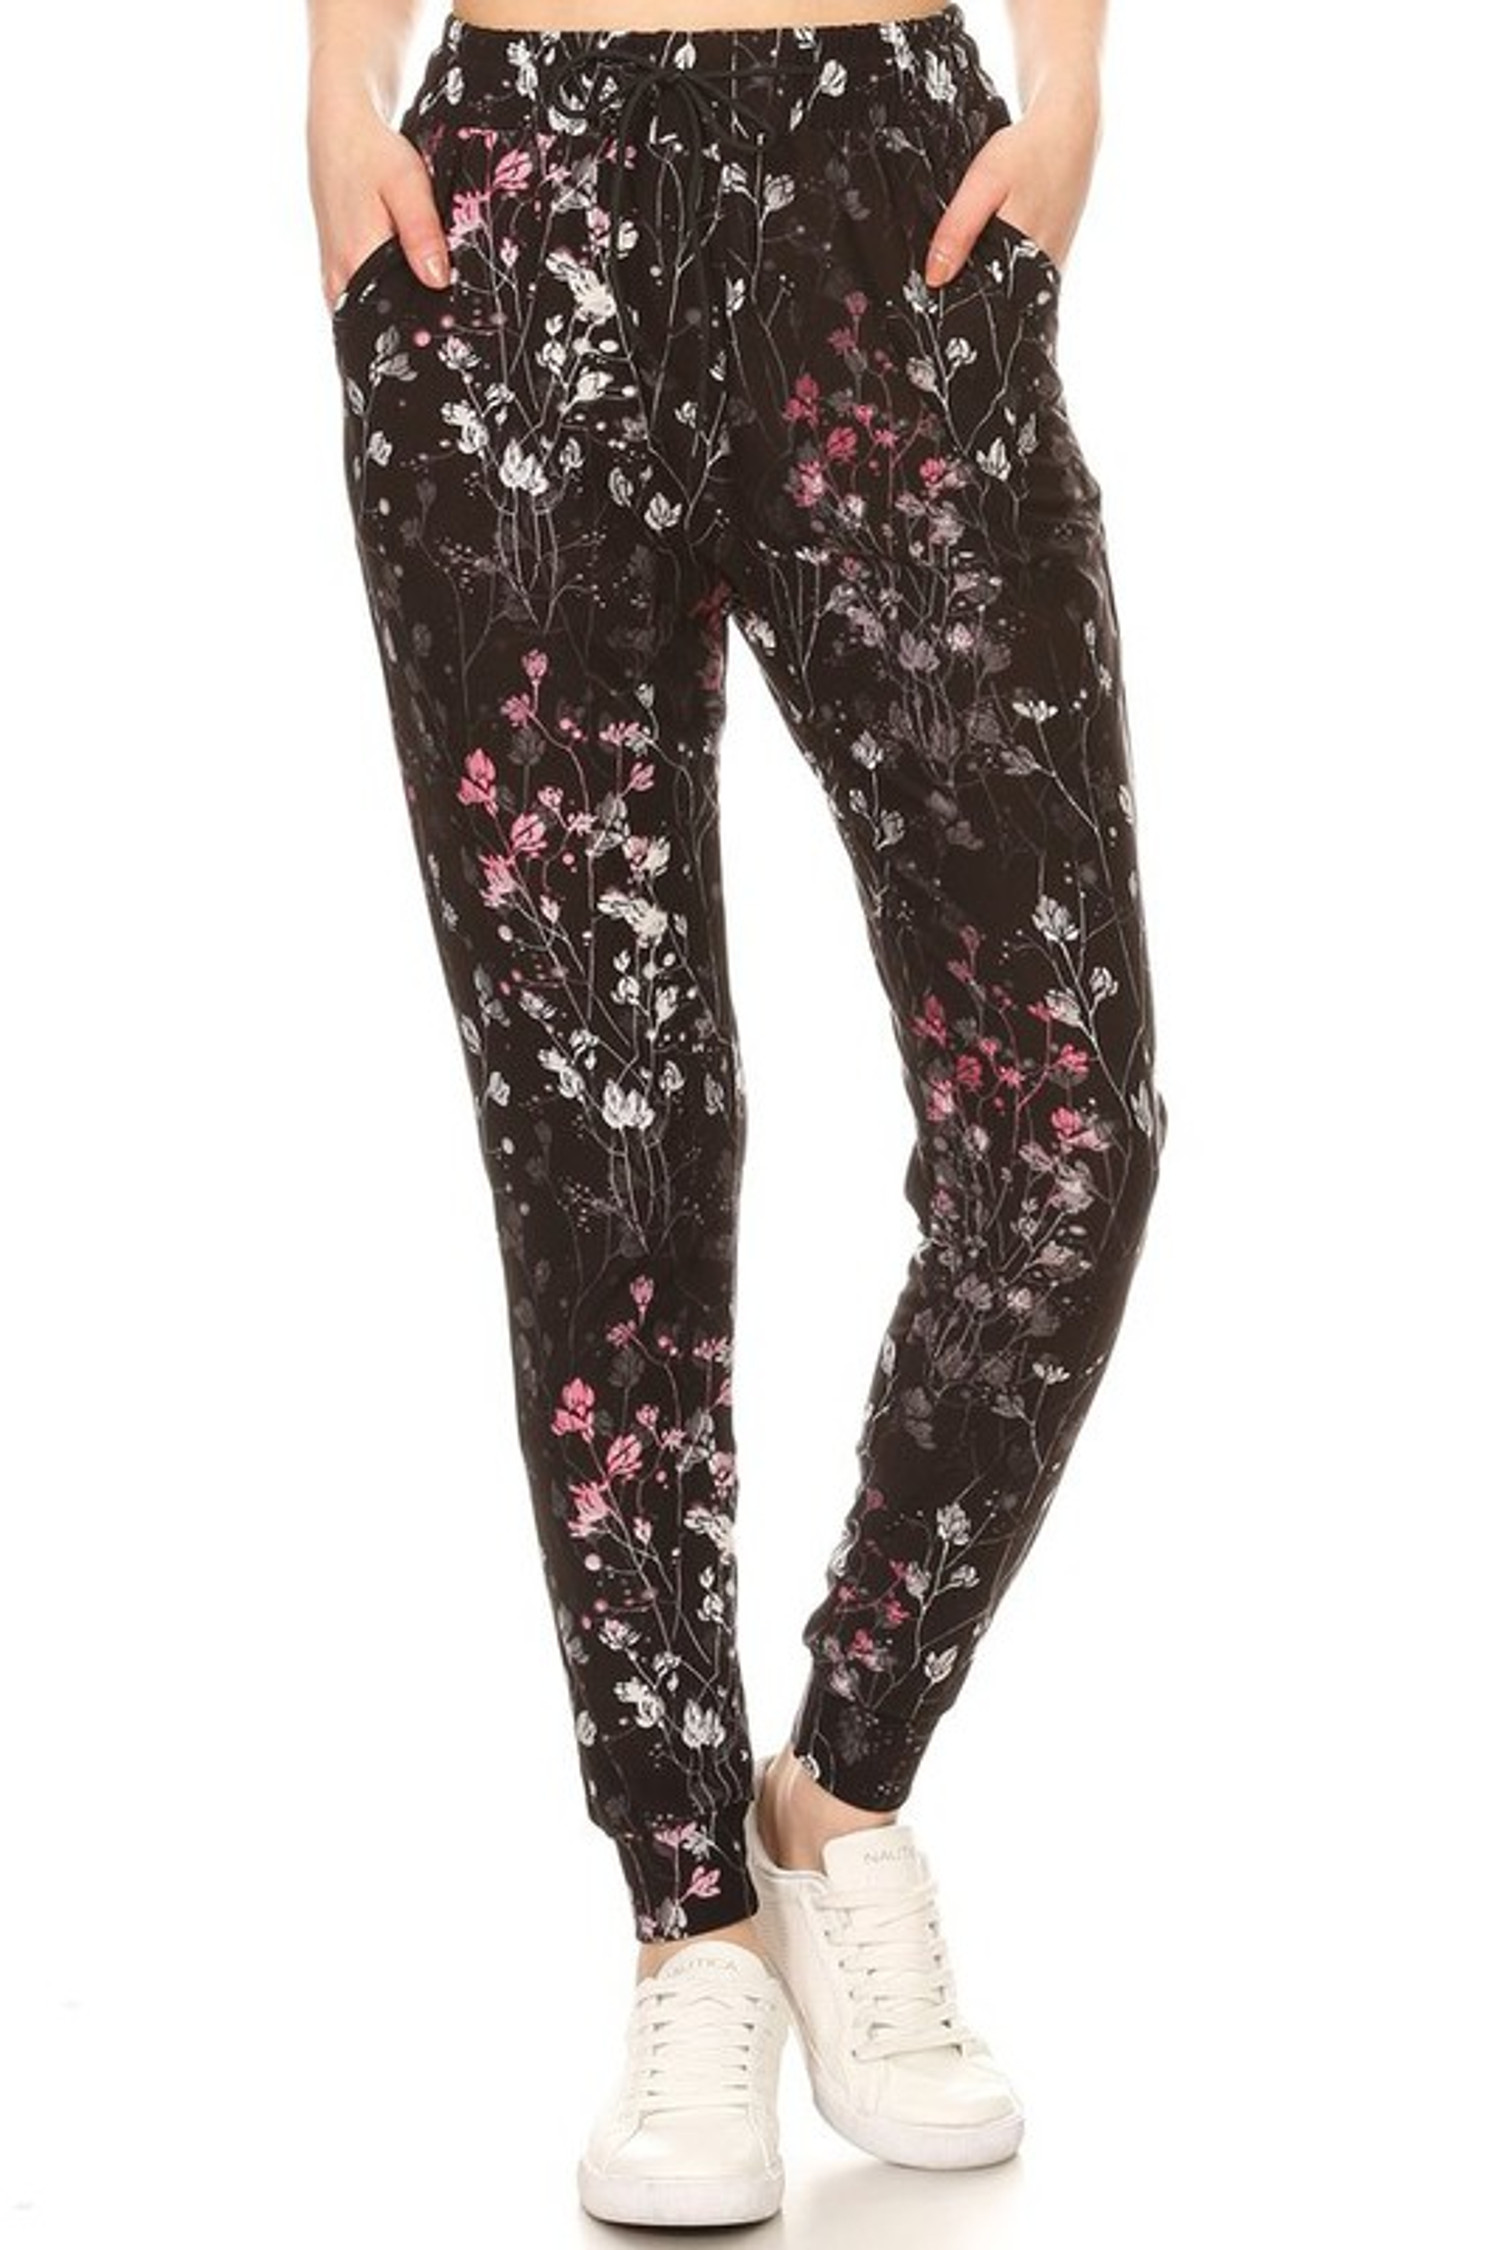 Camouflage Sport Plus Size Leggings with Side Pocket